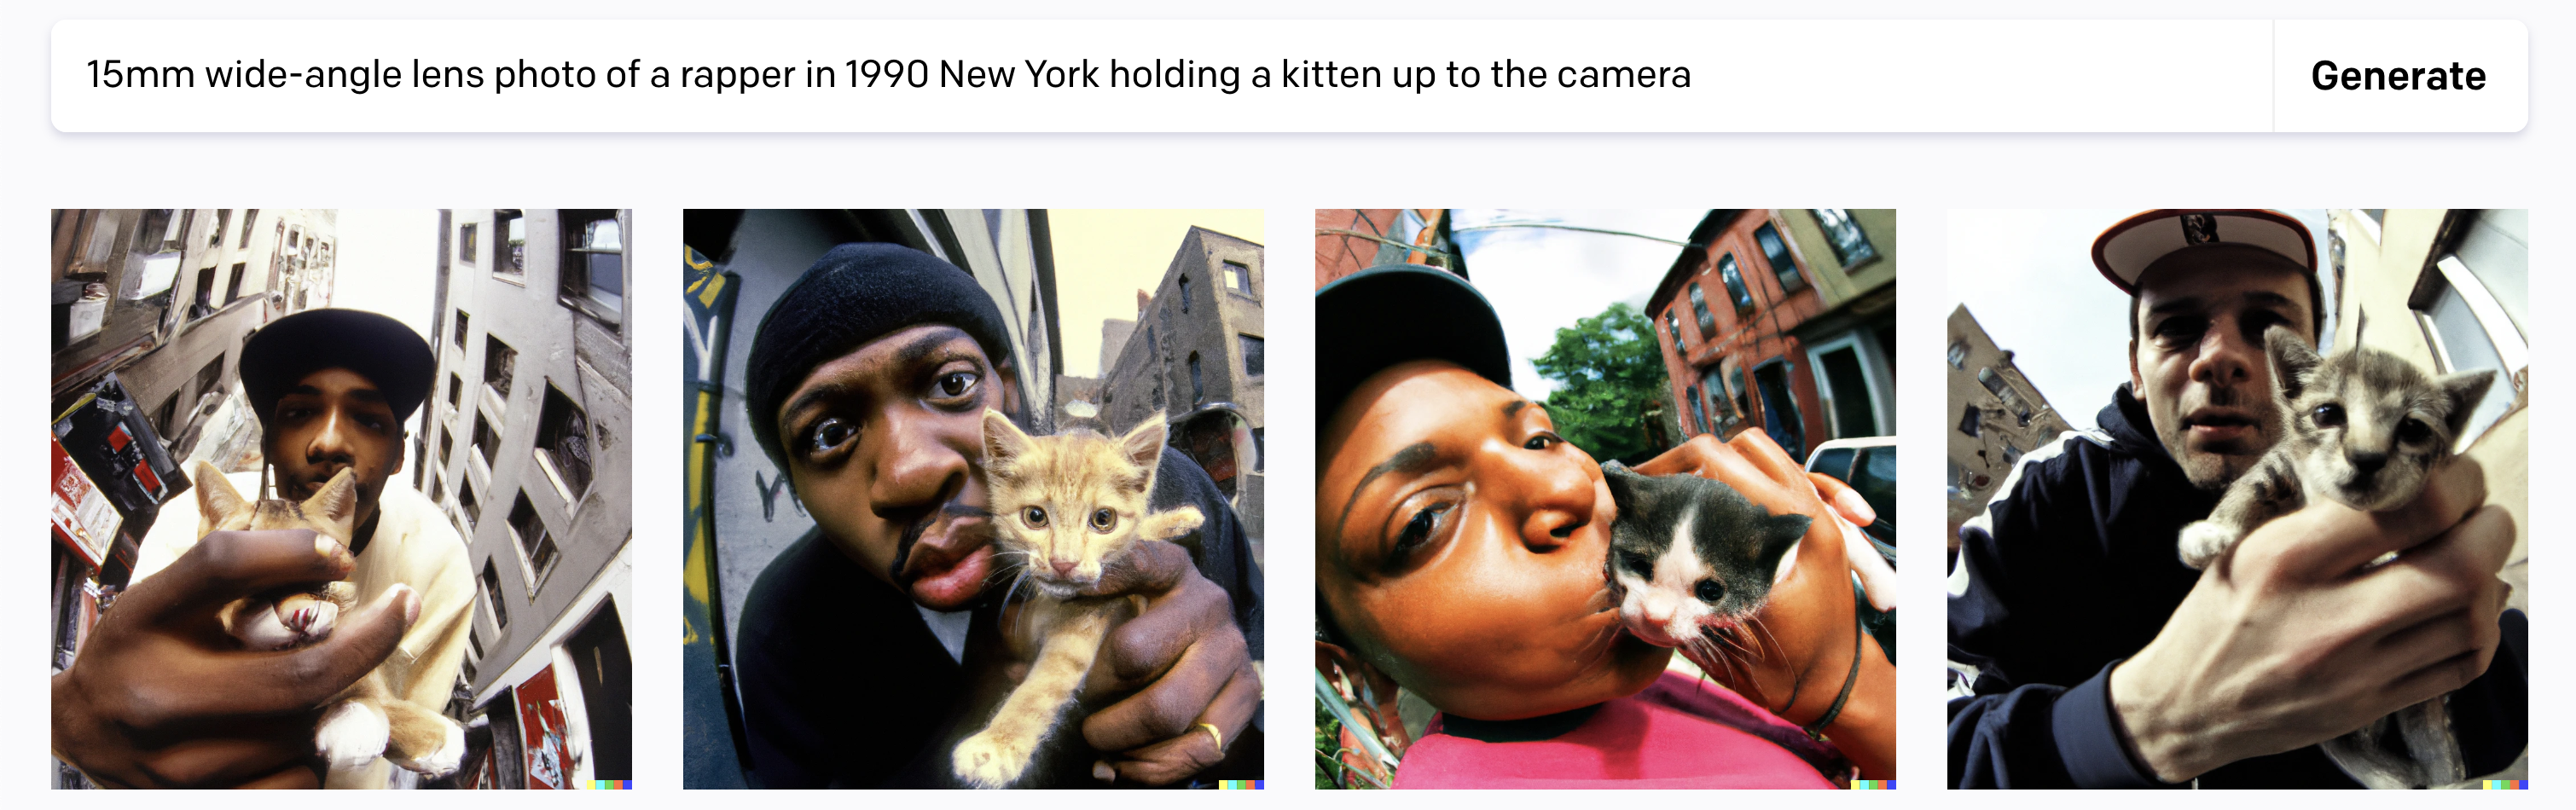 15mm wide-angle lens photo of a rapper in 1990 New York holding a kitten up to the camera